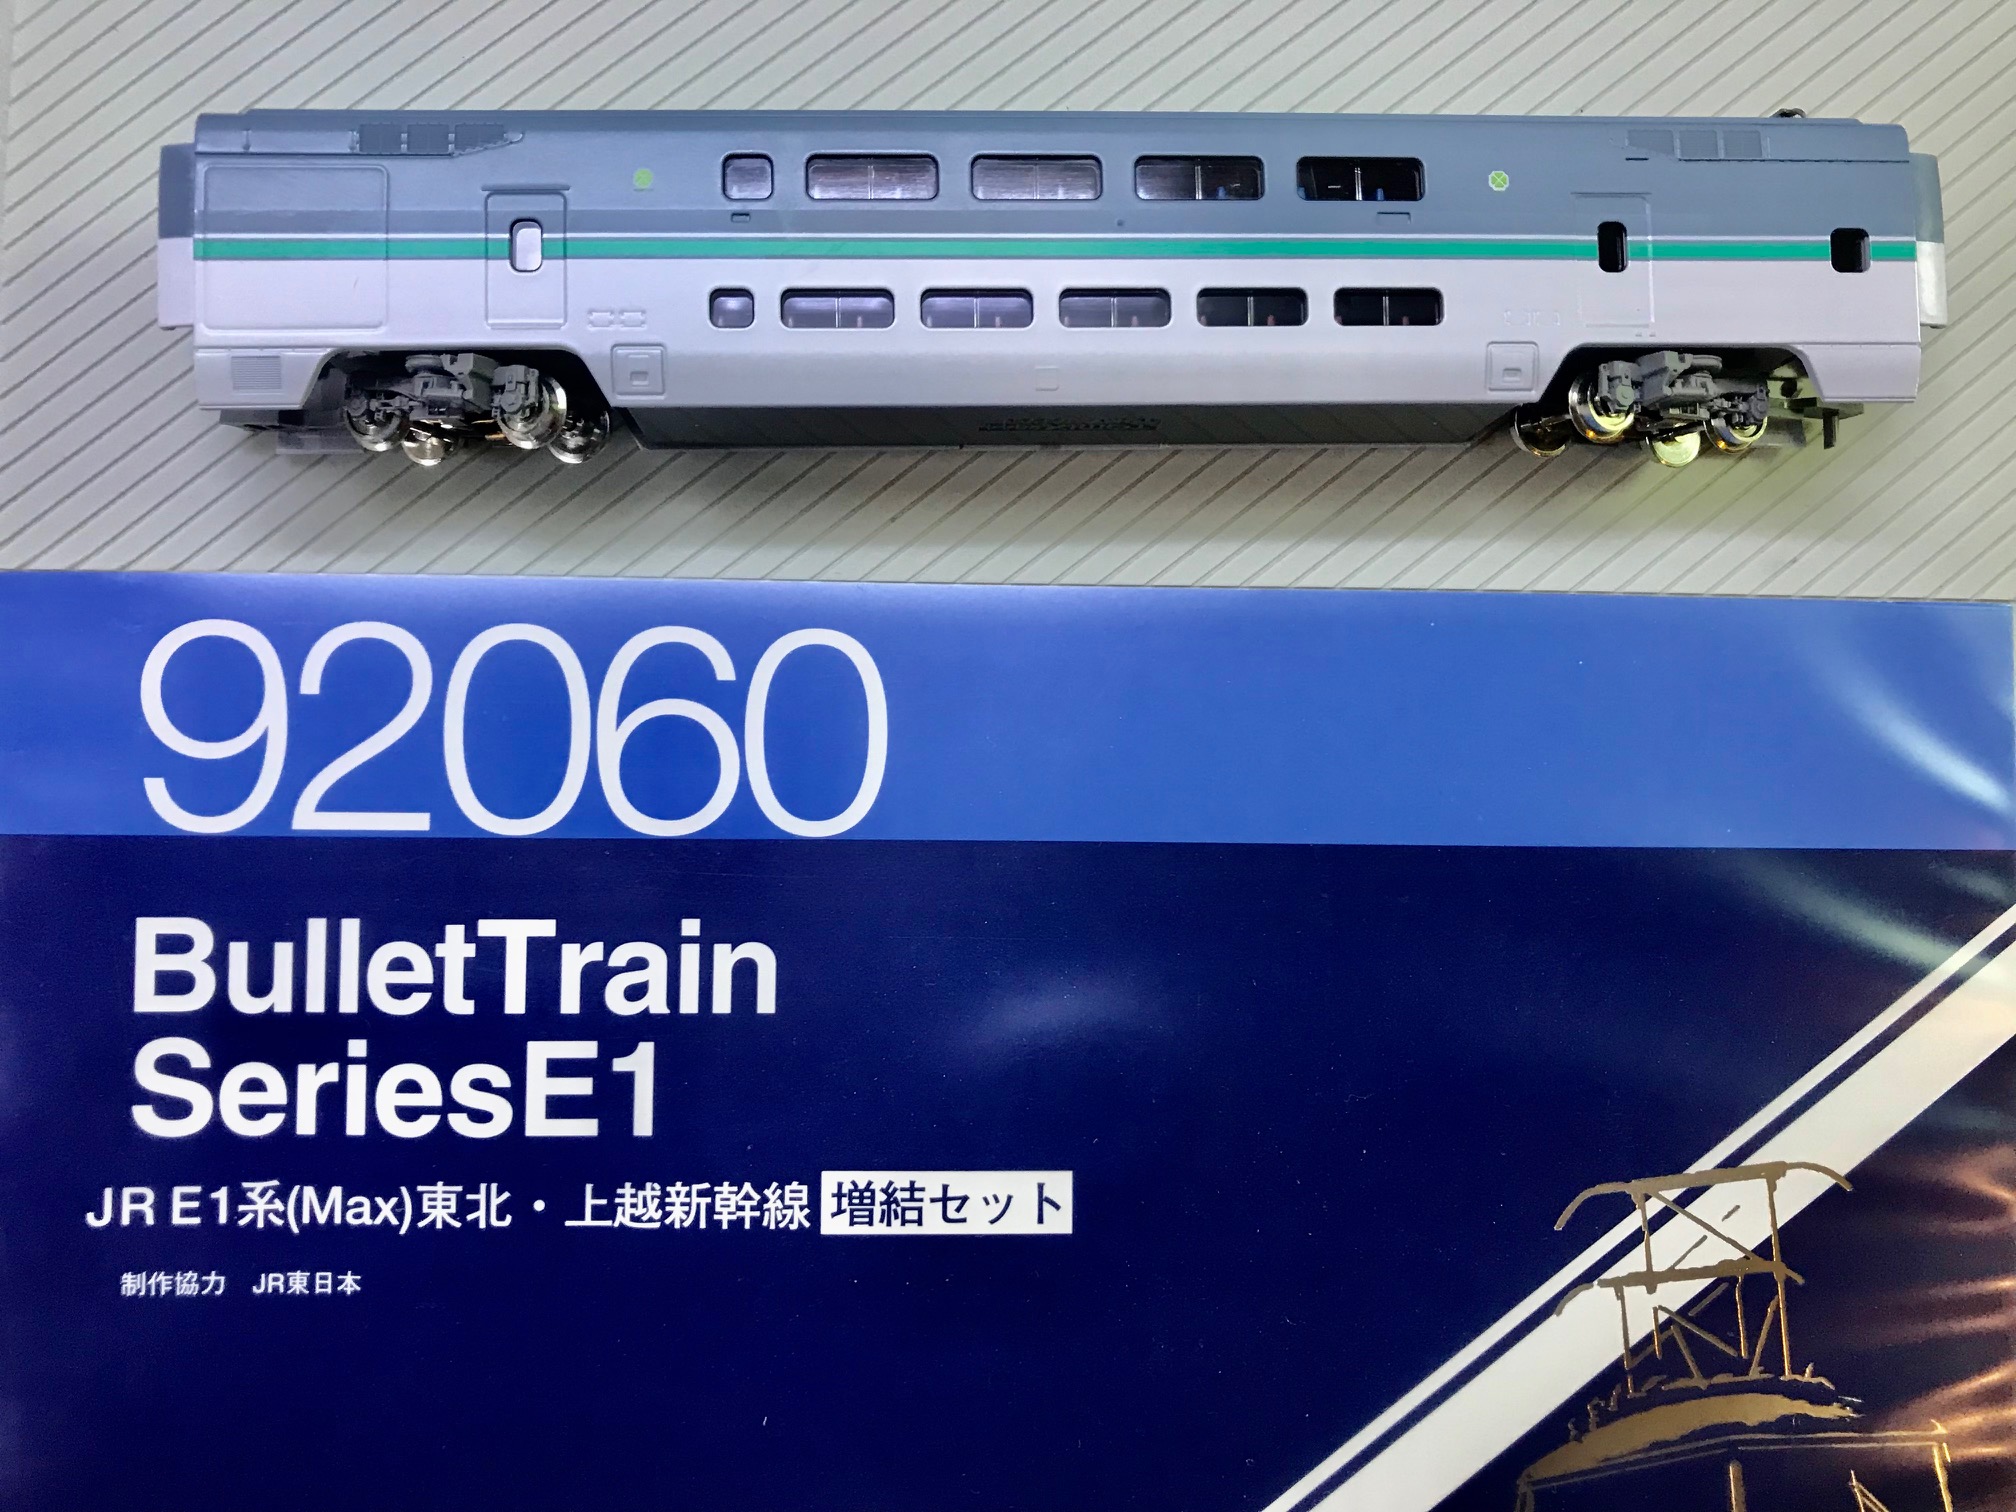 Tomix 92060 Bullet Train Series1. Add on Observation Coaches.. Tomix 92060 รถไฟหัวกระสุน Series1. เพิ่มโค้ชสังเกตการณ์